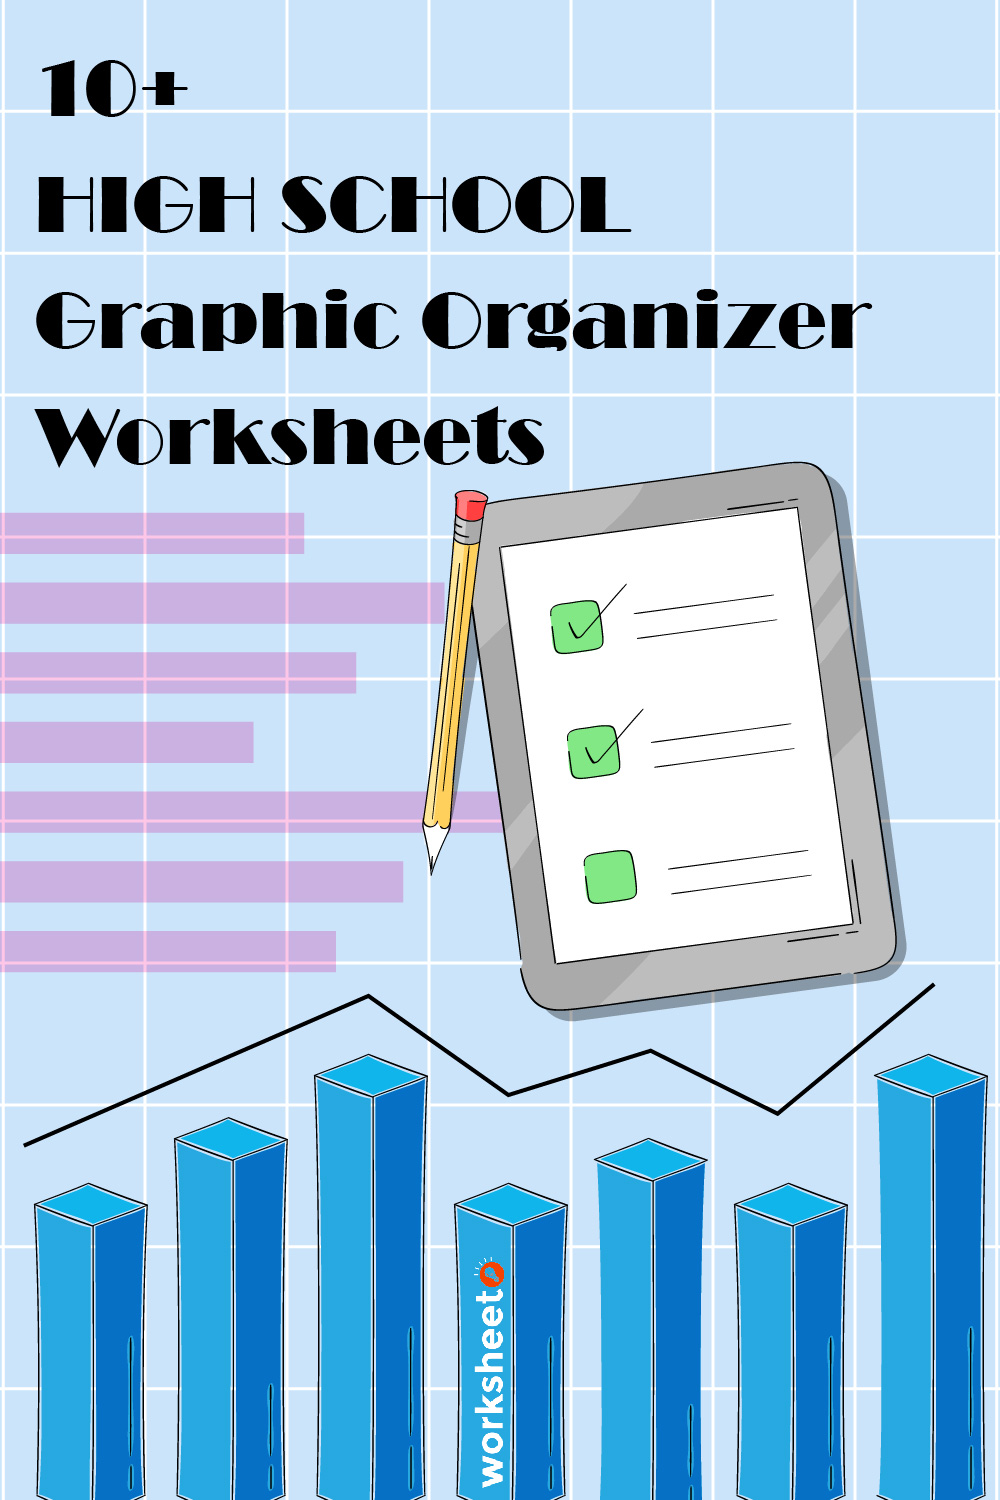 16 Images of High School Graphic Organizer Worksheets